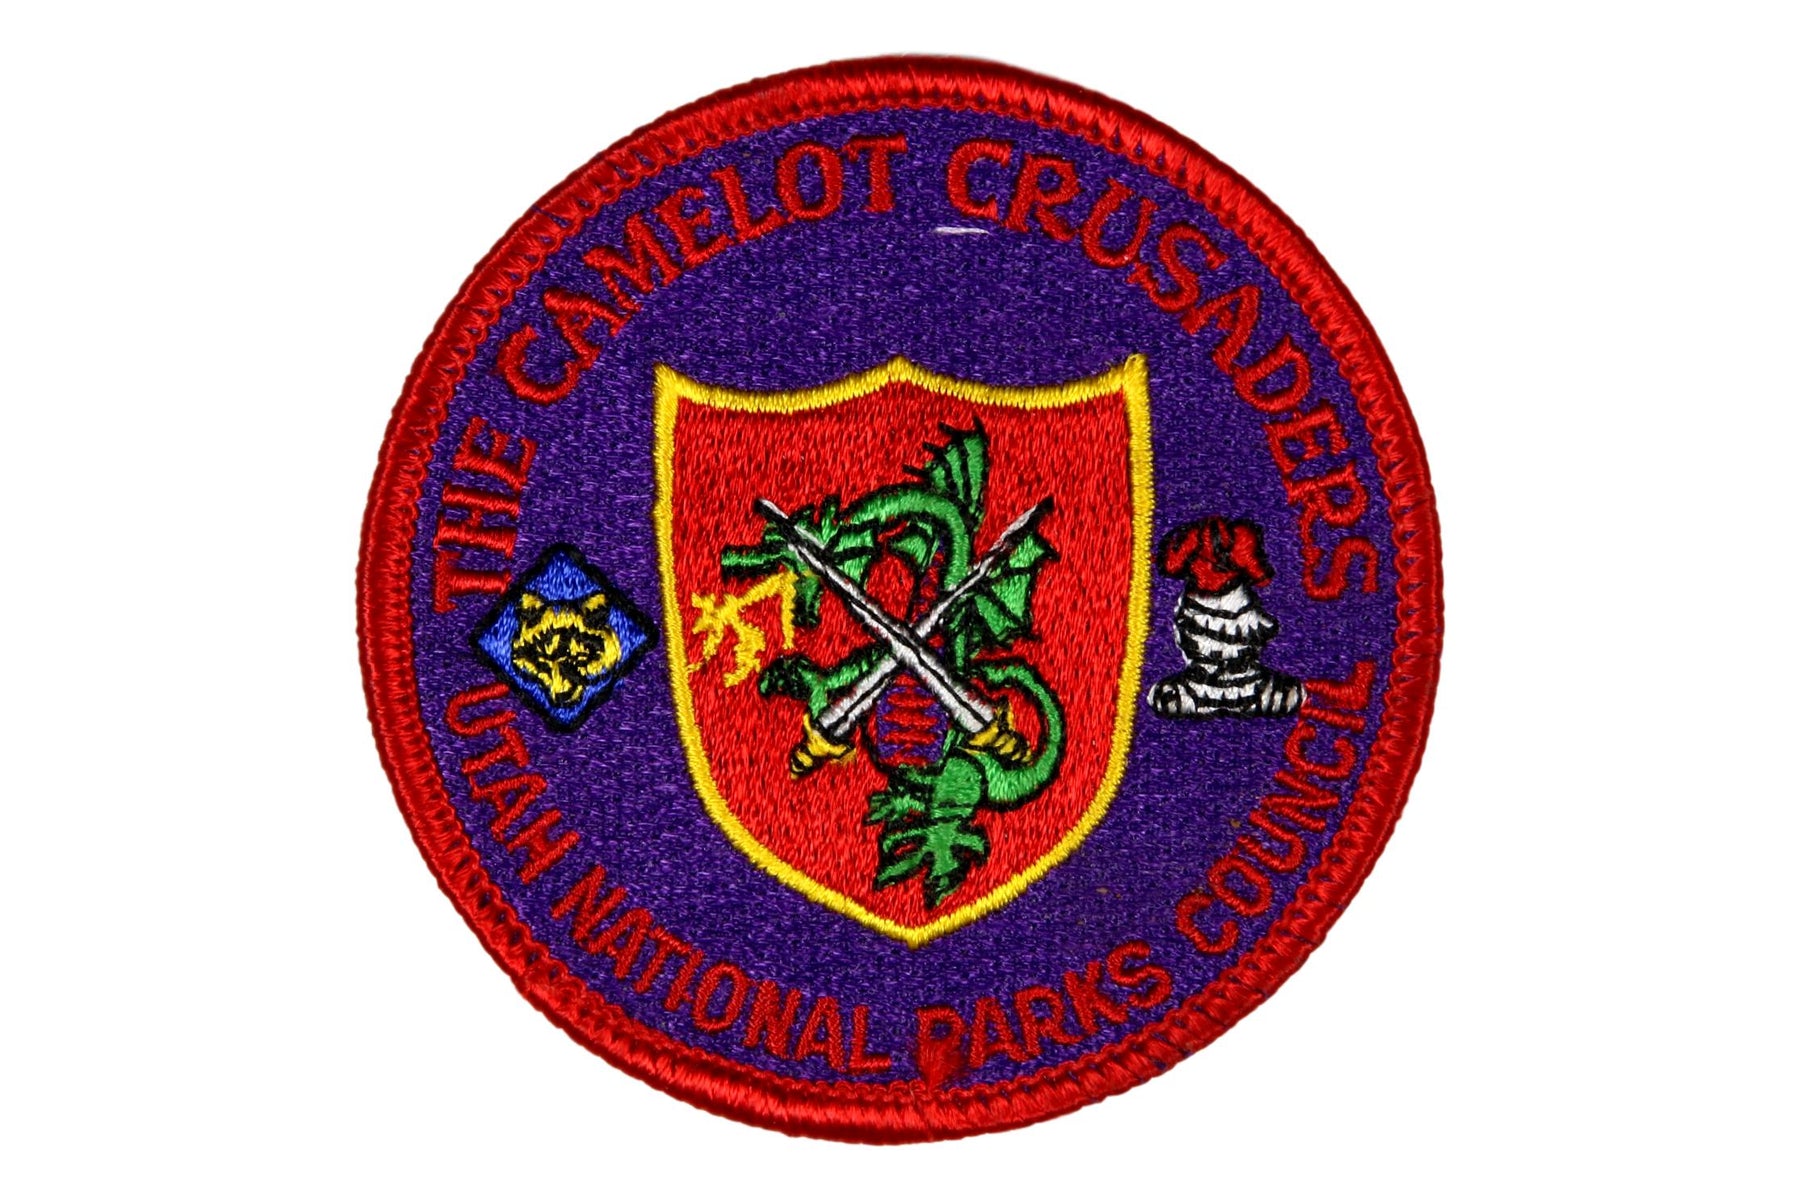 Utah National Parks The Camelot Crusaders Patch